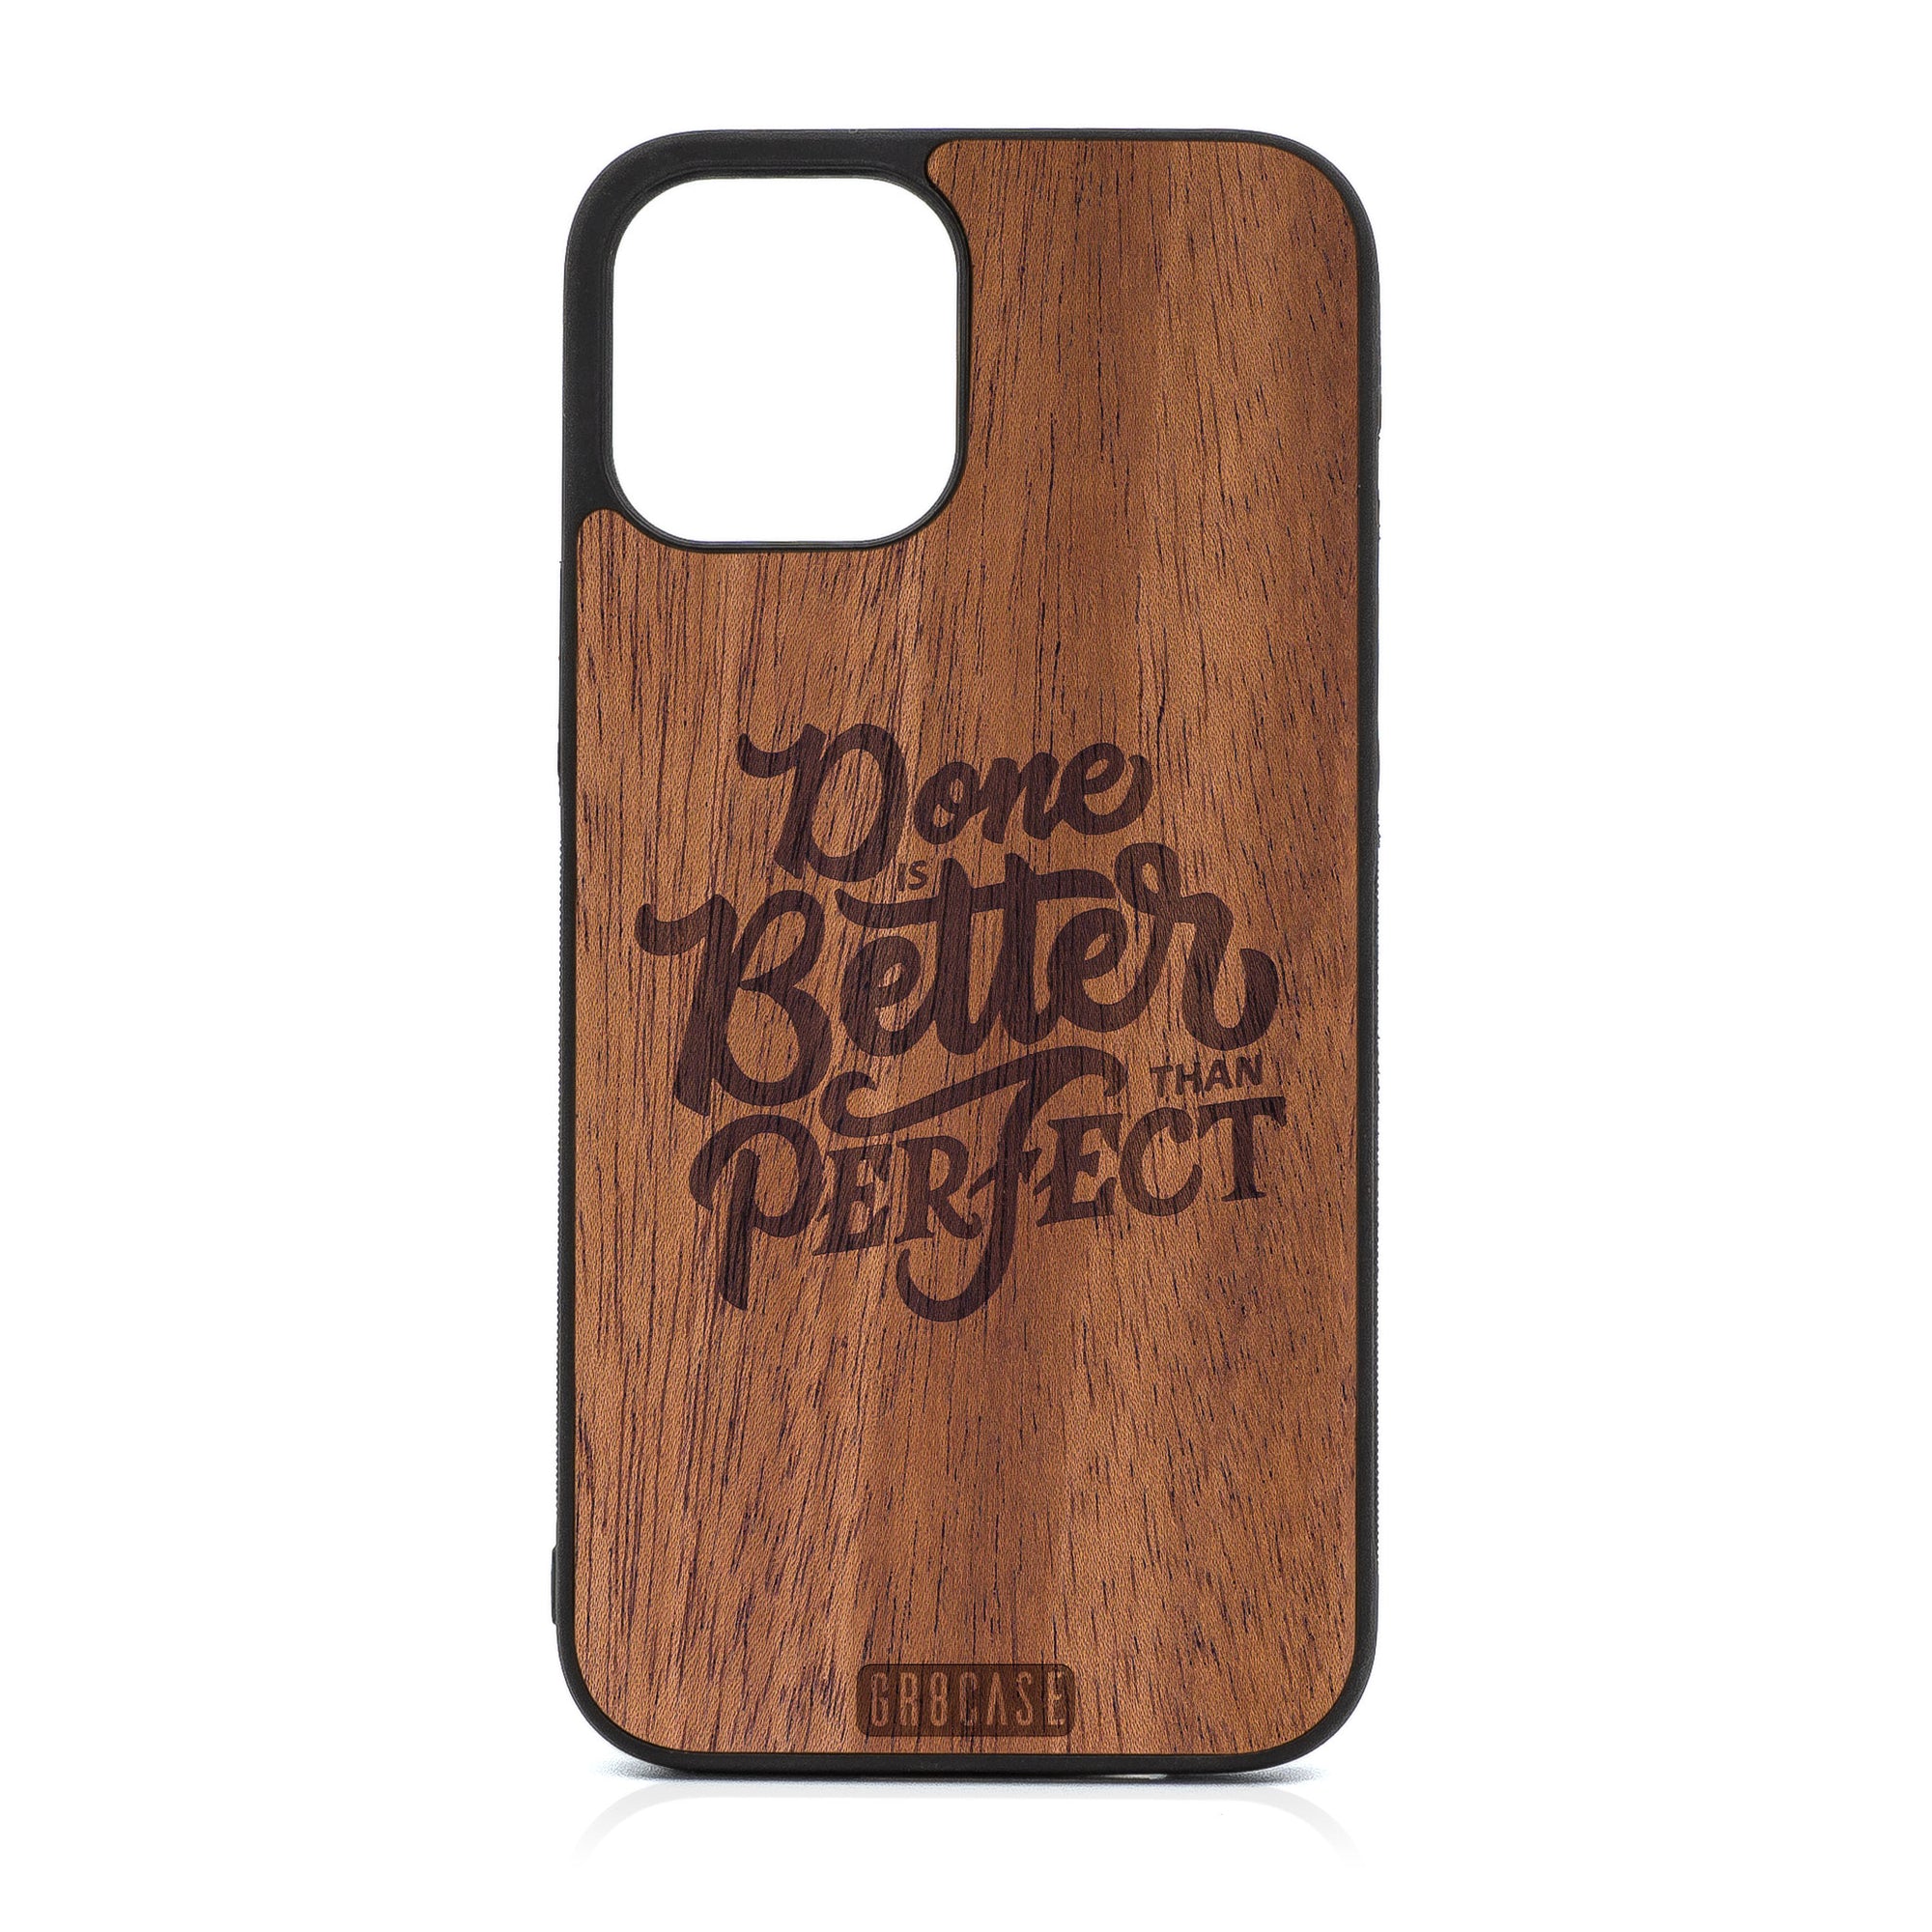 Done Is Better Than Perfect Design Wood Case For iPhone 12 Pro Max